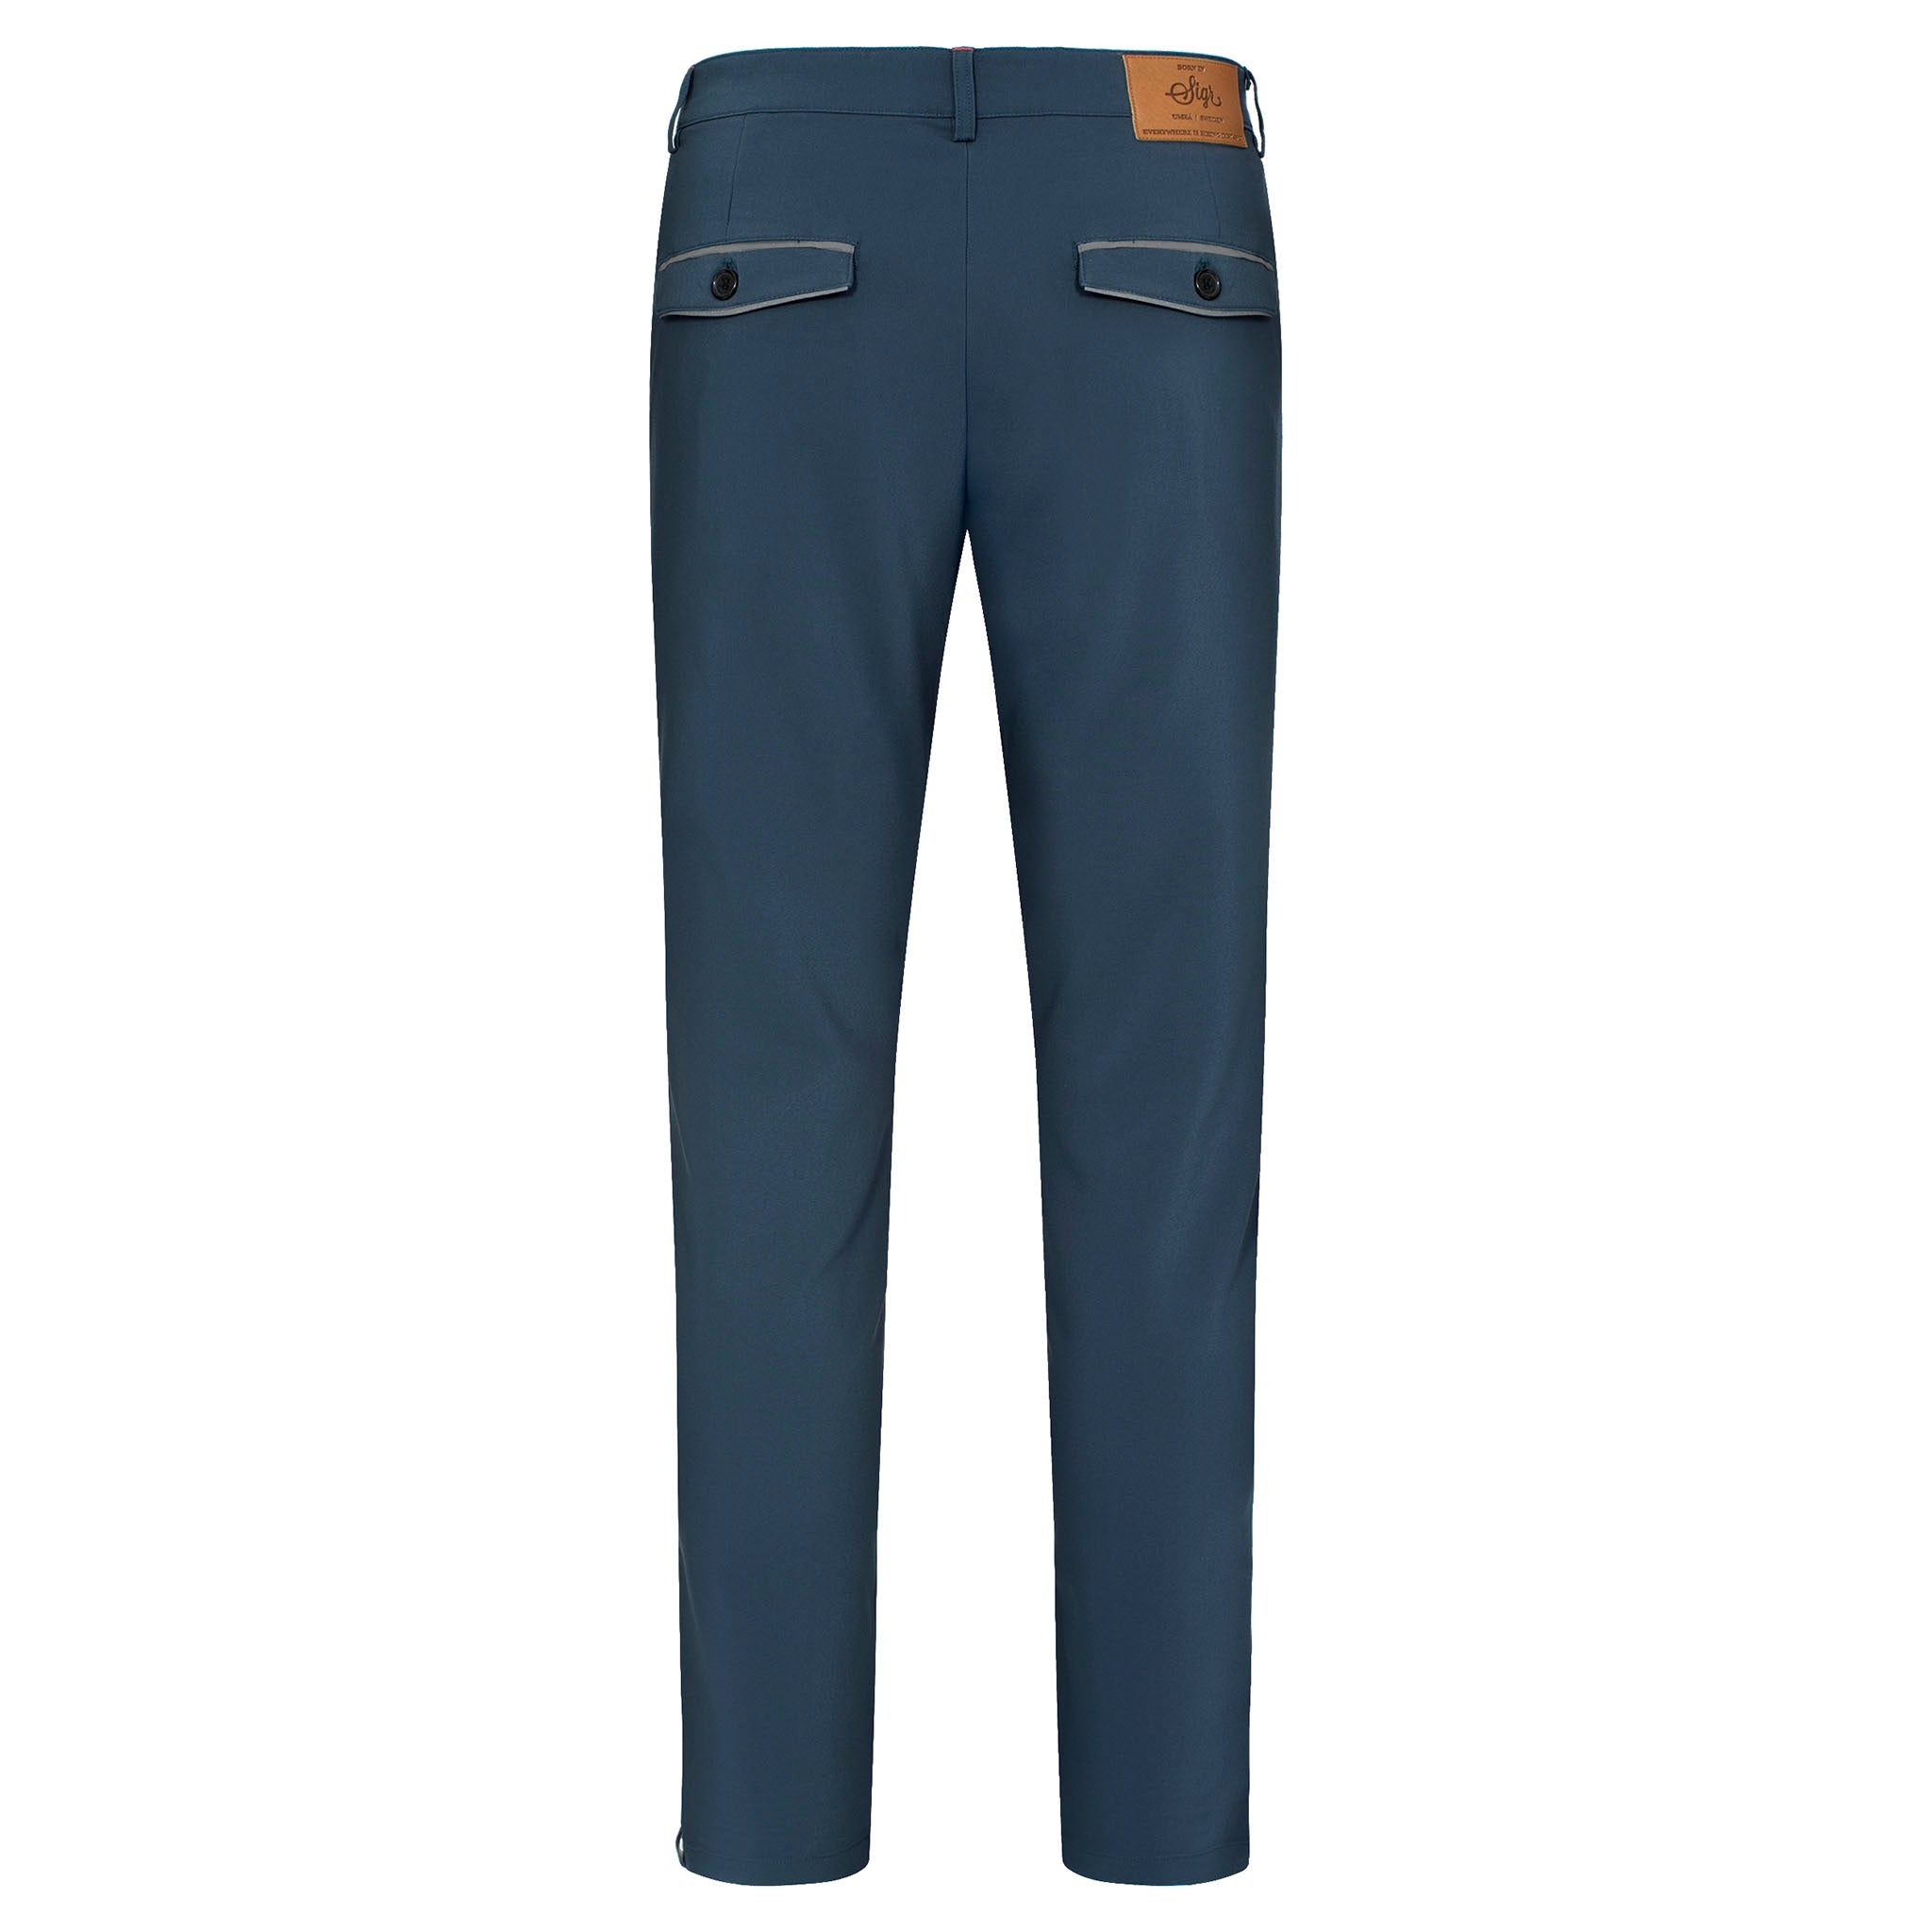 Riksvag 99 - Road Cycling Chinos in Petrol Blue for Men